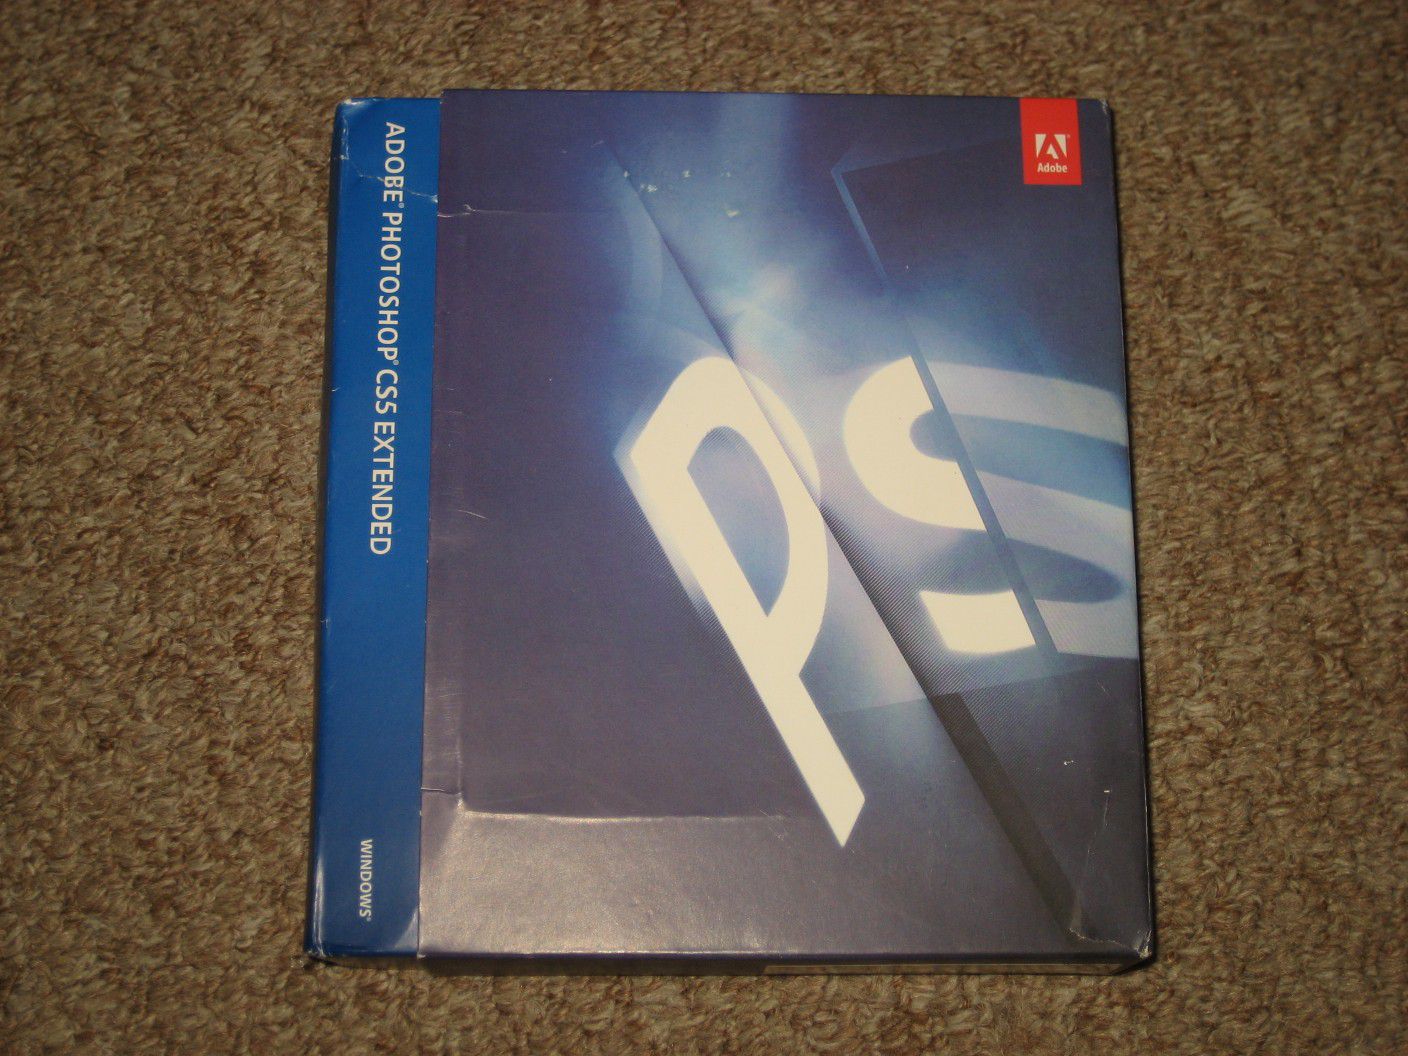 Adobe Photoshop CS5 Extended Edition Software for Windows